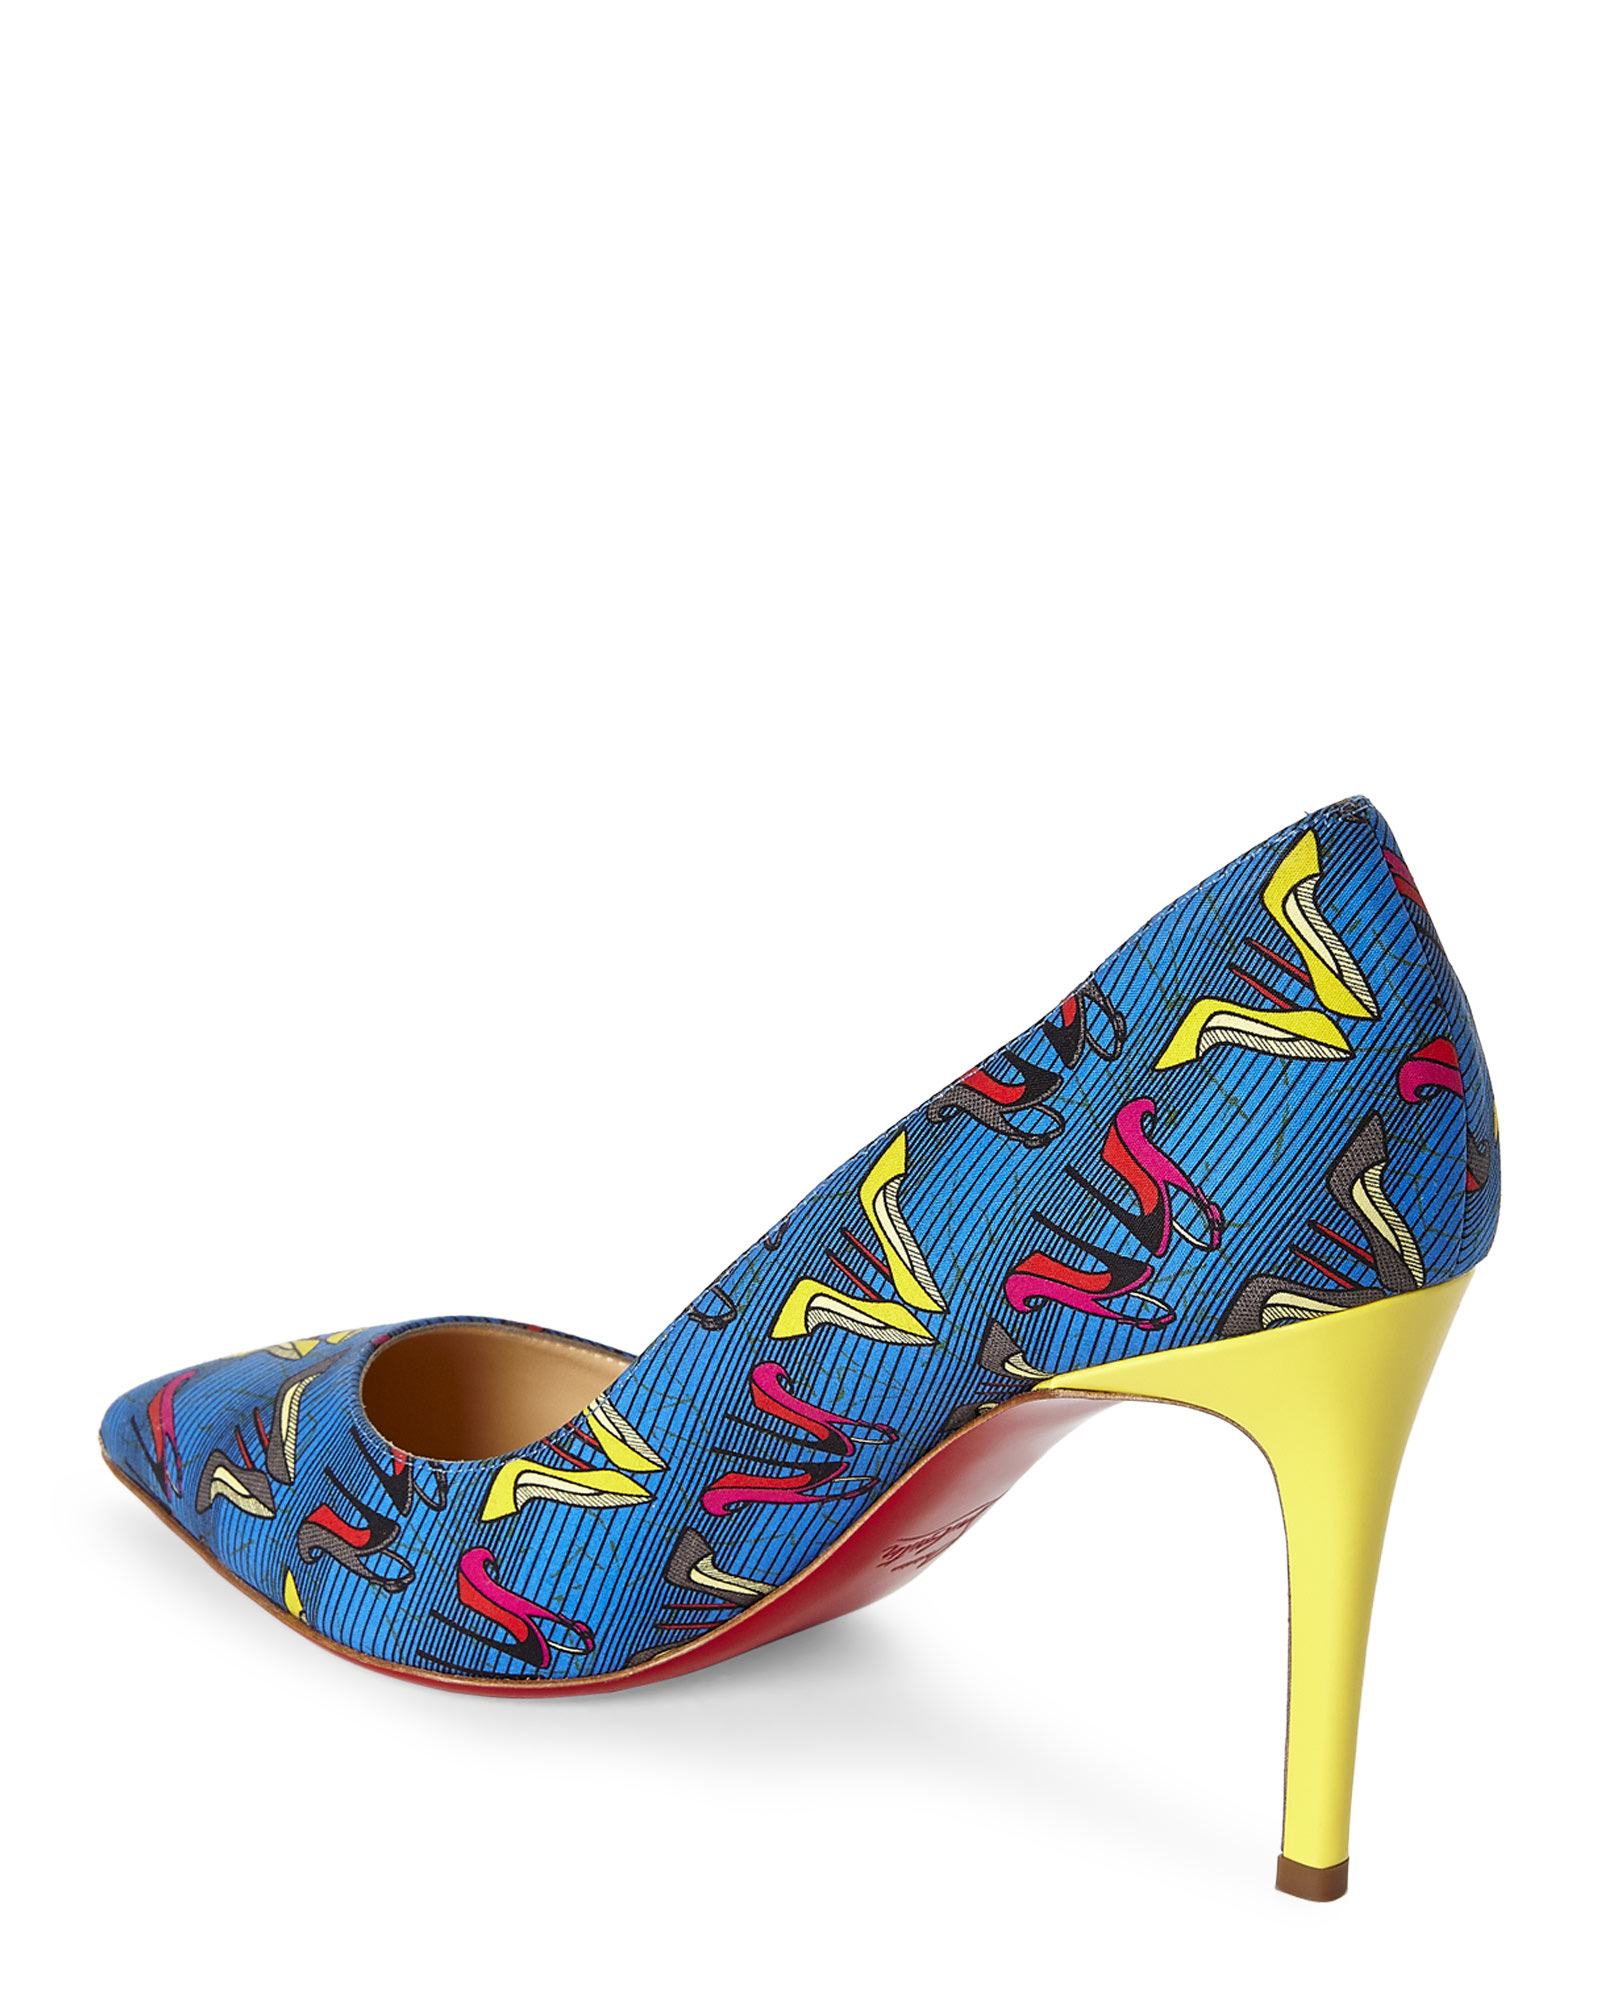 Christian louboutin Blue Pigalle Printed Mid-Heel Pumps in Blue | Lyst